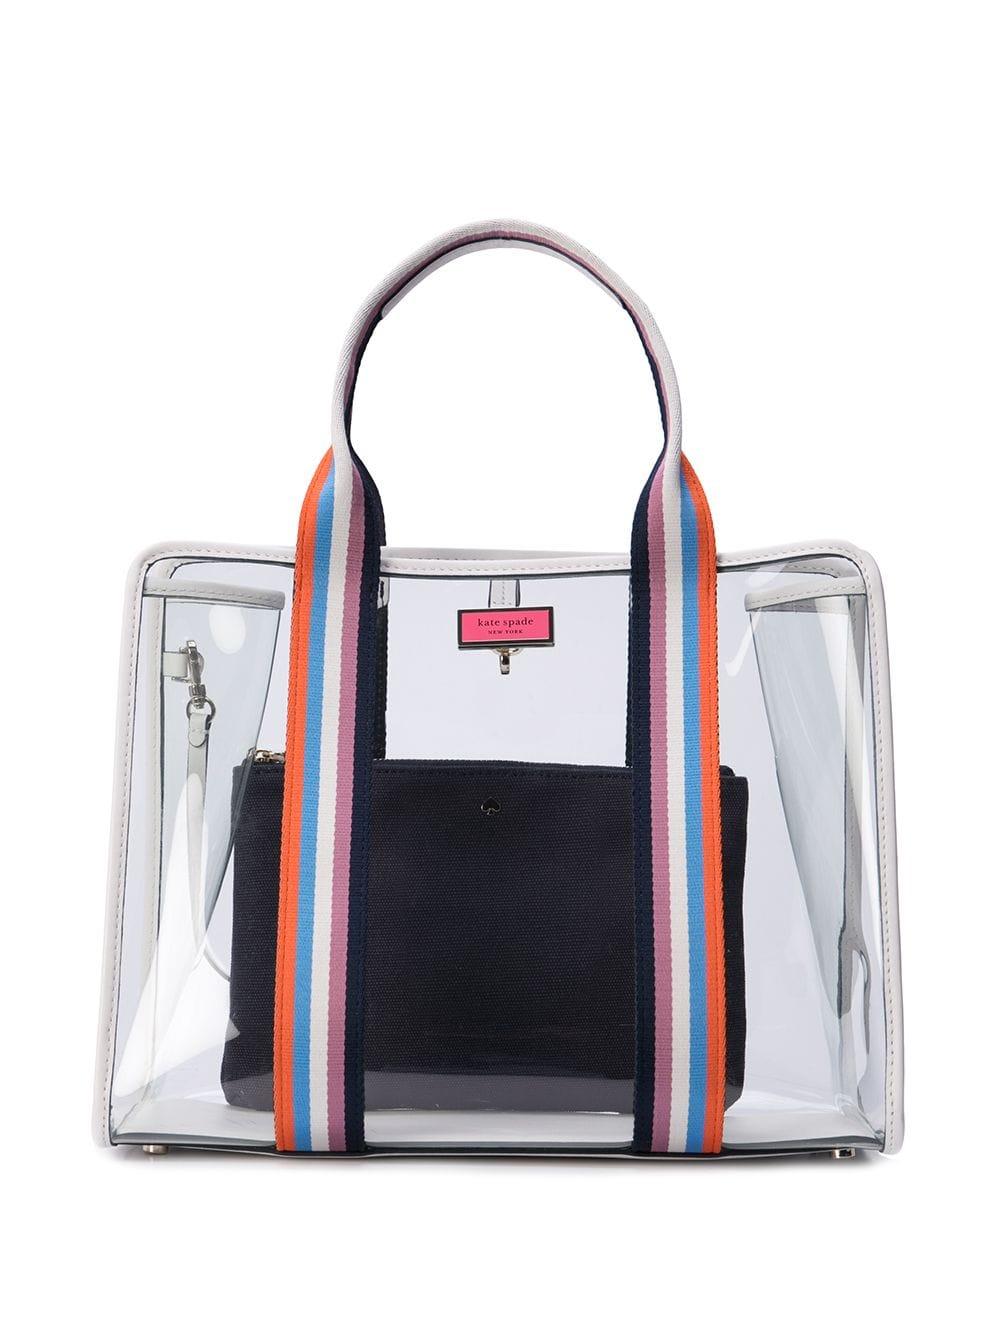 Kate Spade Transparent Tote Bag in White | Lyst